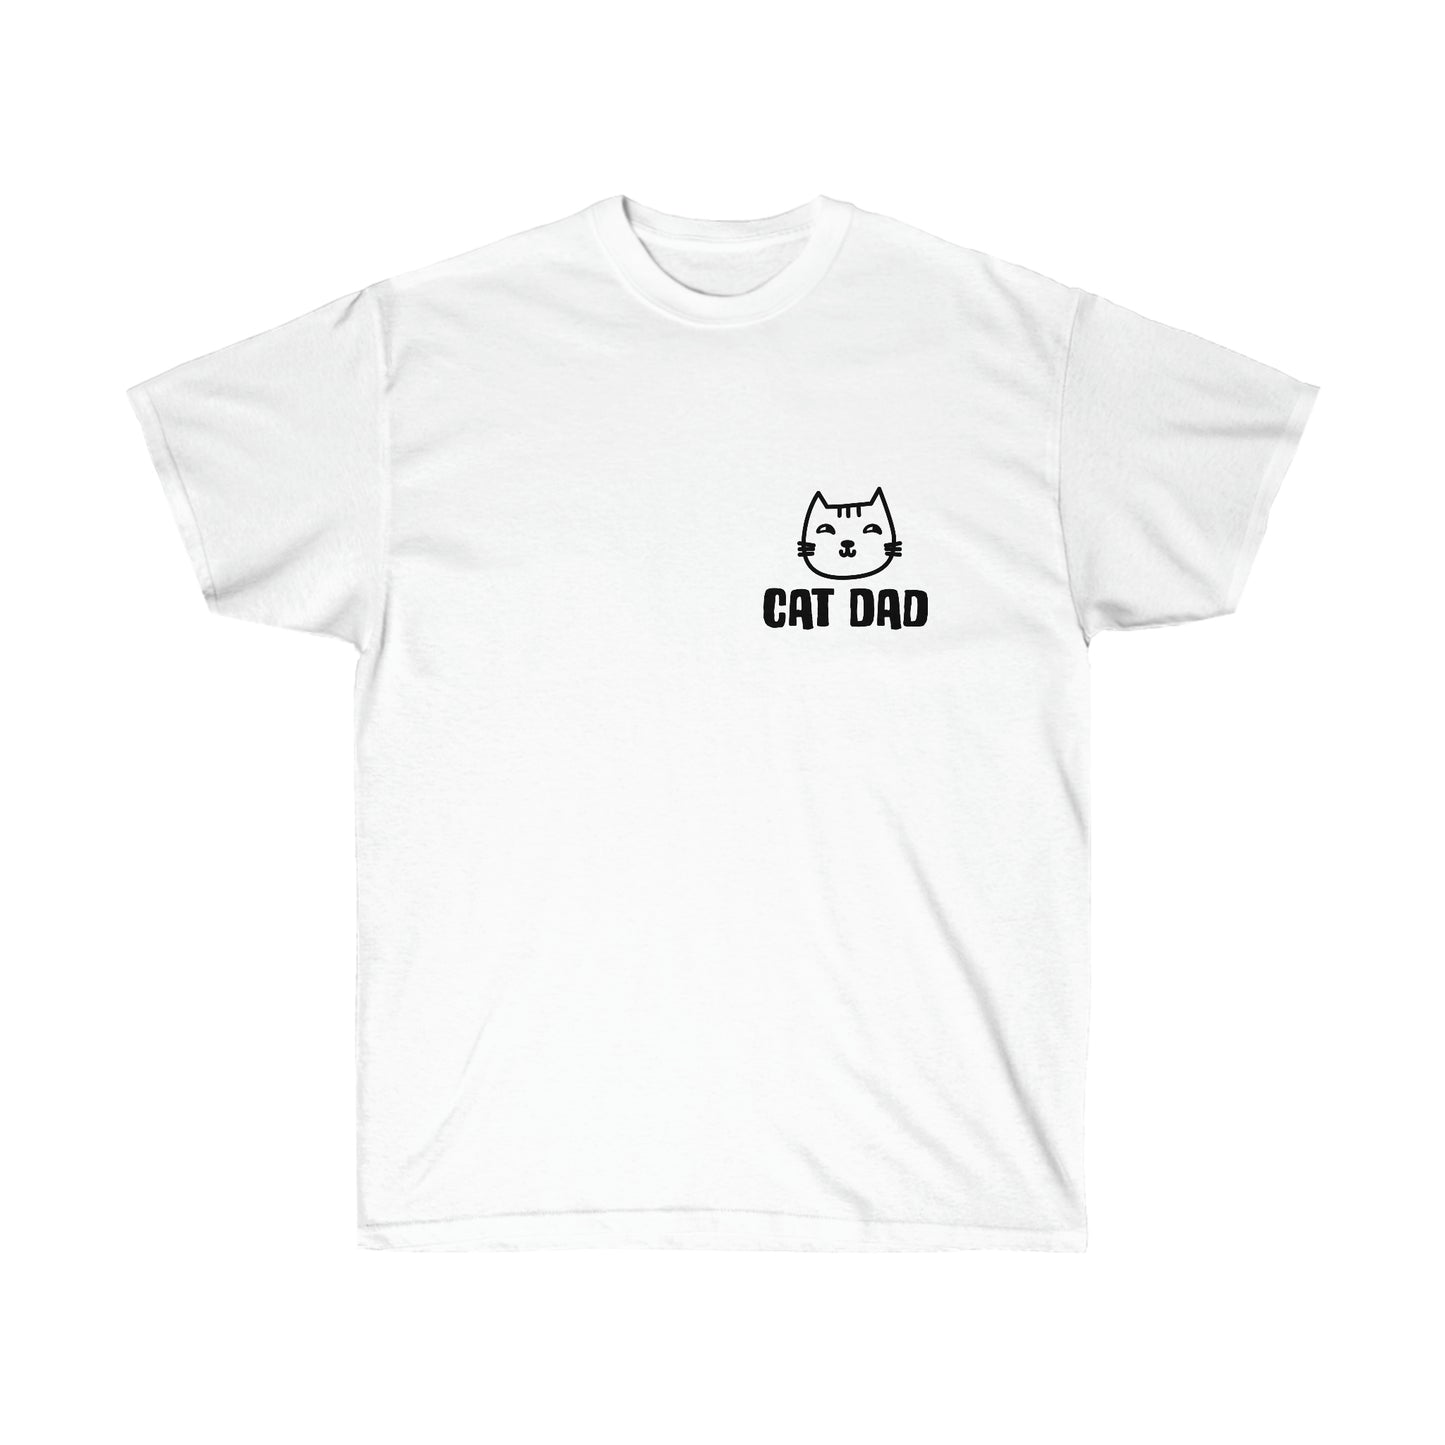 Cat Dad T-Shirt - Proud and Playful Tee for Cat Enthusiasts - Gift for Cat Dads